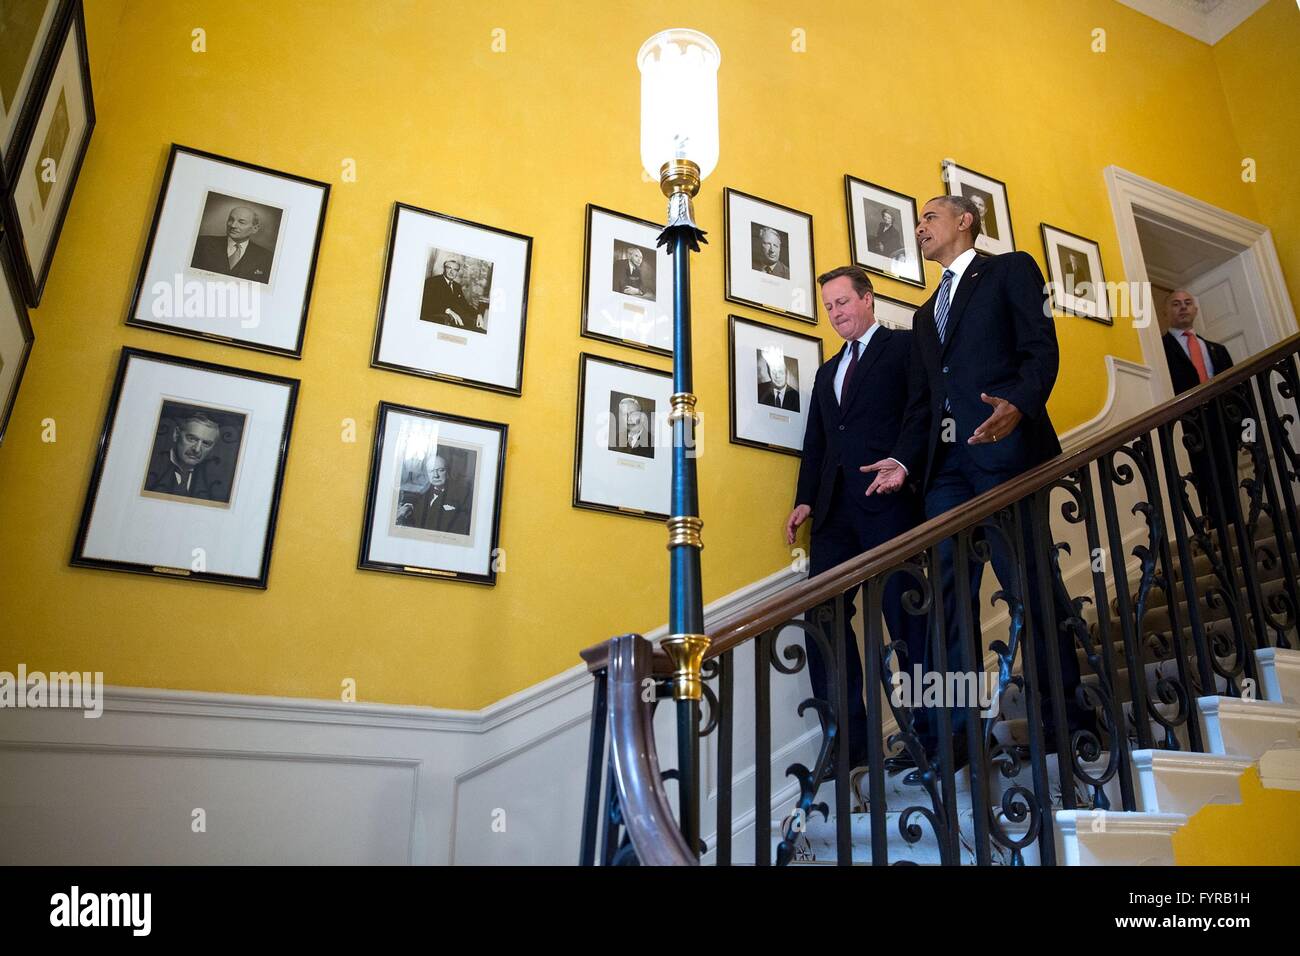 U.S President Barack Obama and British Prime Minister David Cameron walks down the staircase inside Number 10 Downing Street April 22, 2016 in London, United Kingdom. Stock Photo